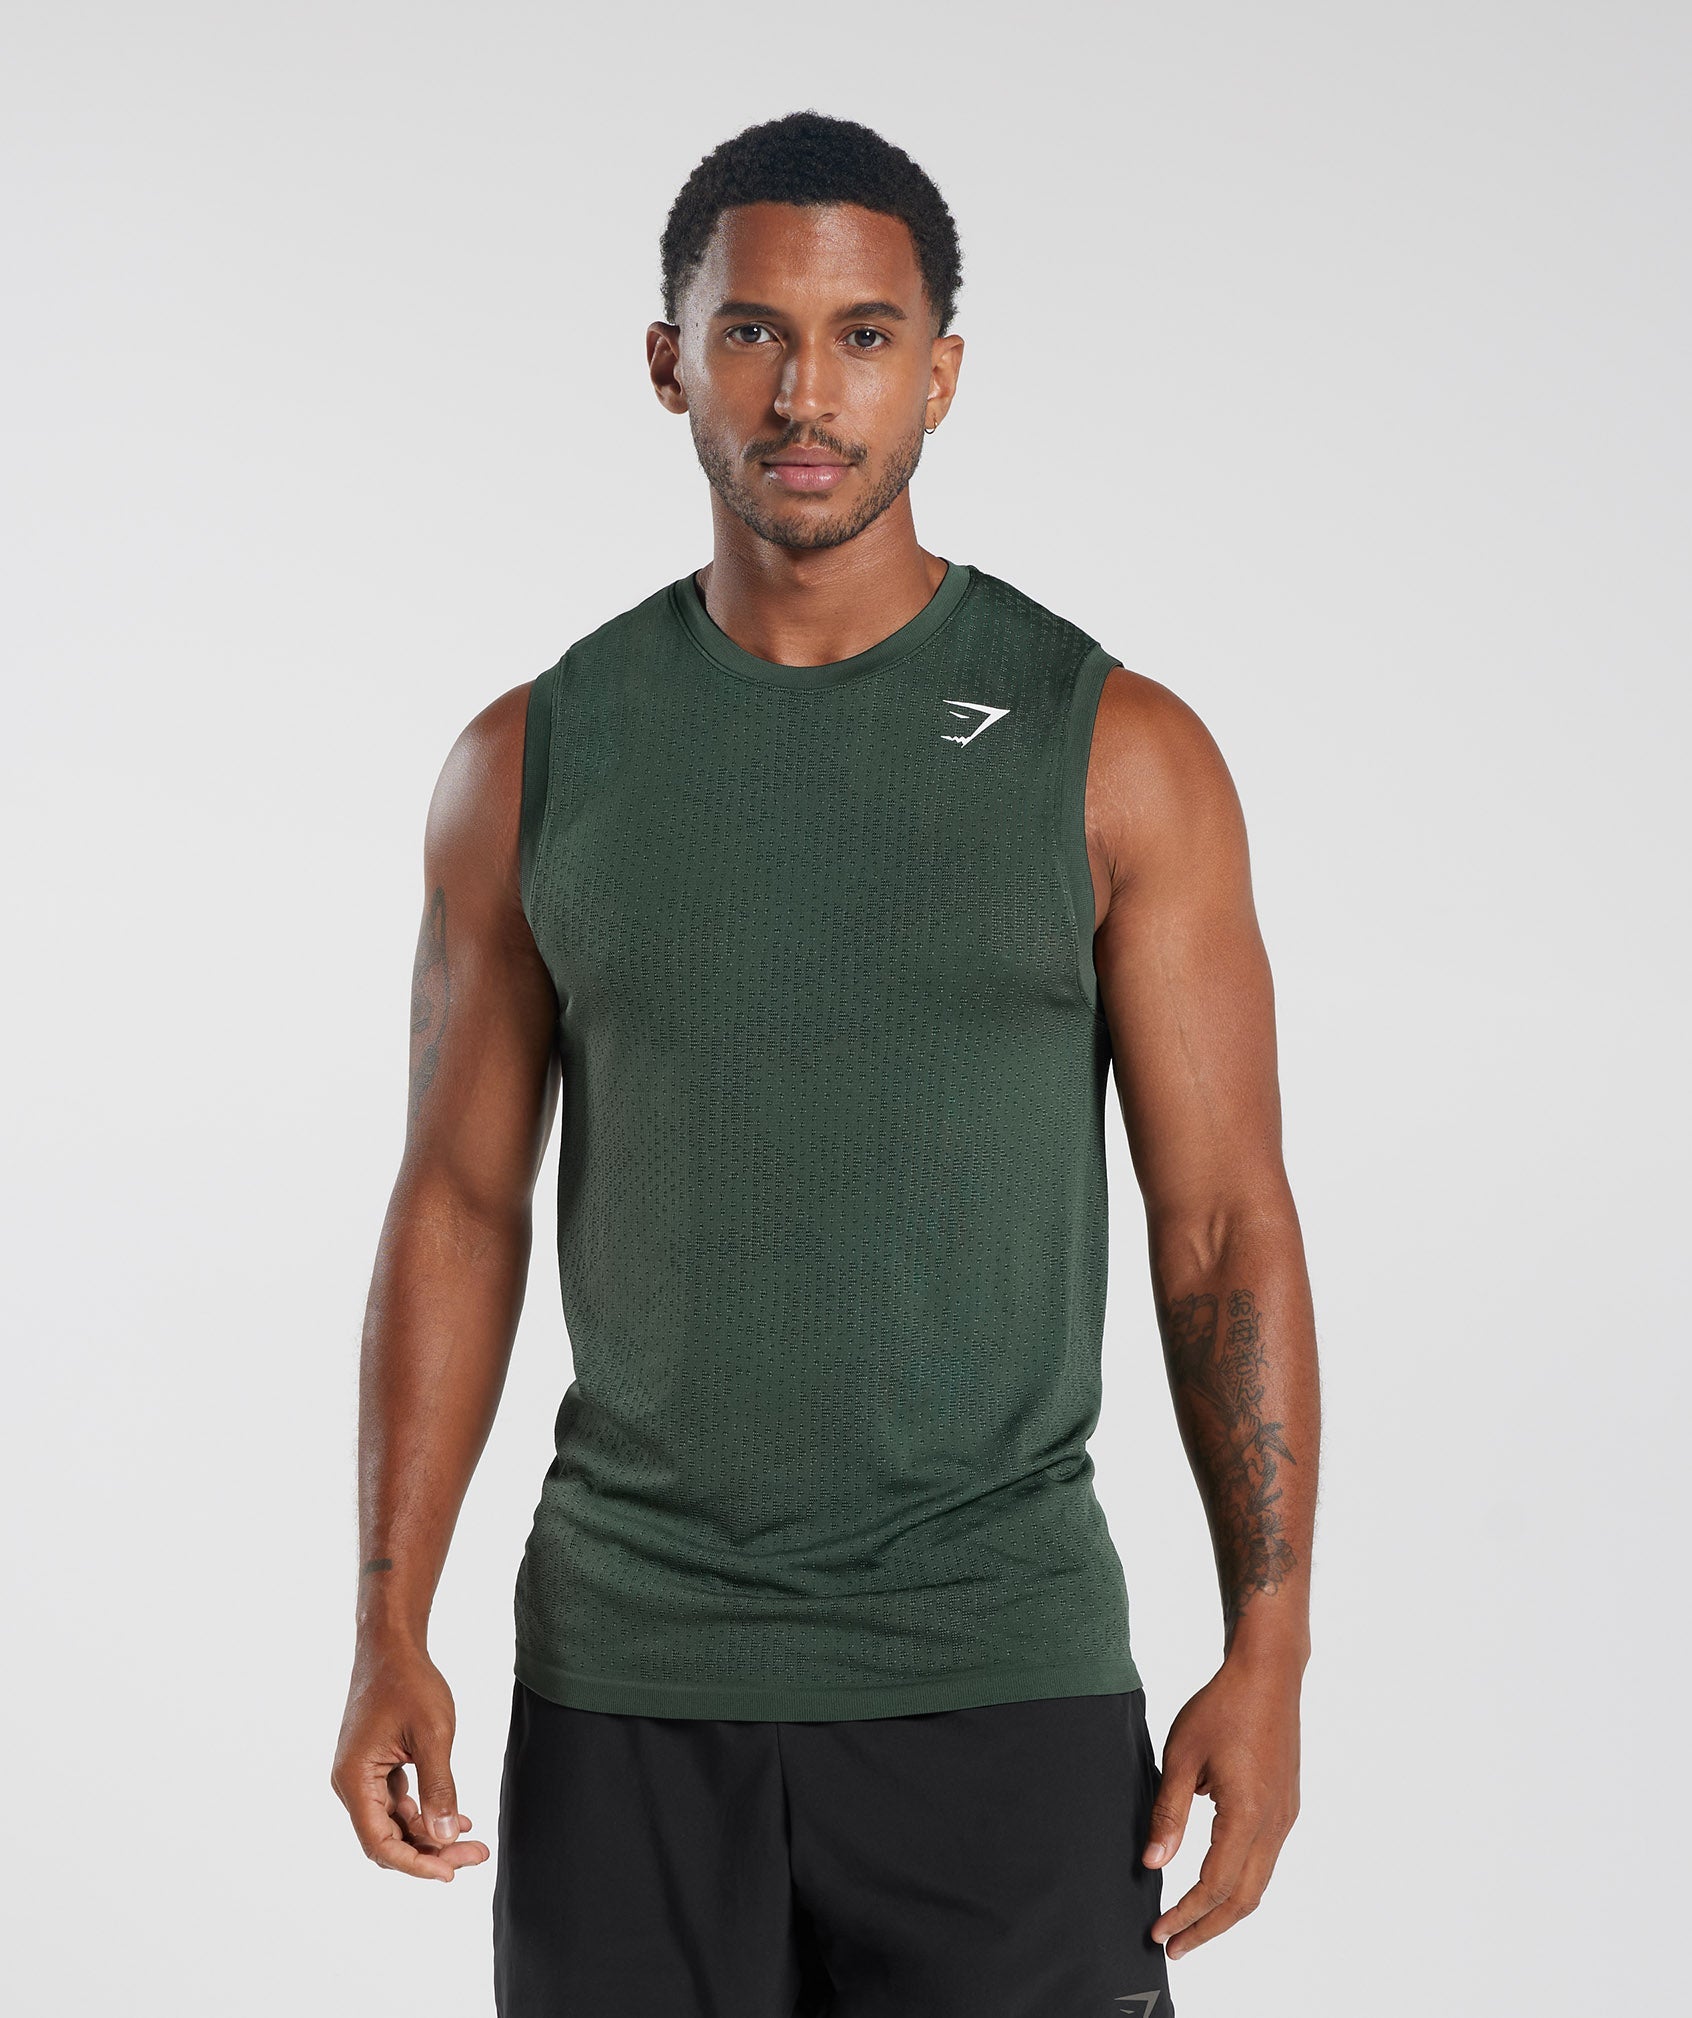 Sport Seamless Tank in Fog Green/Black is out of stock